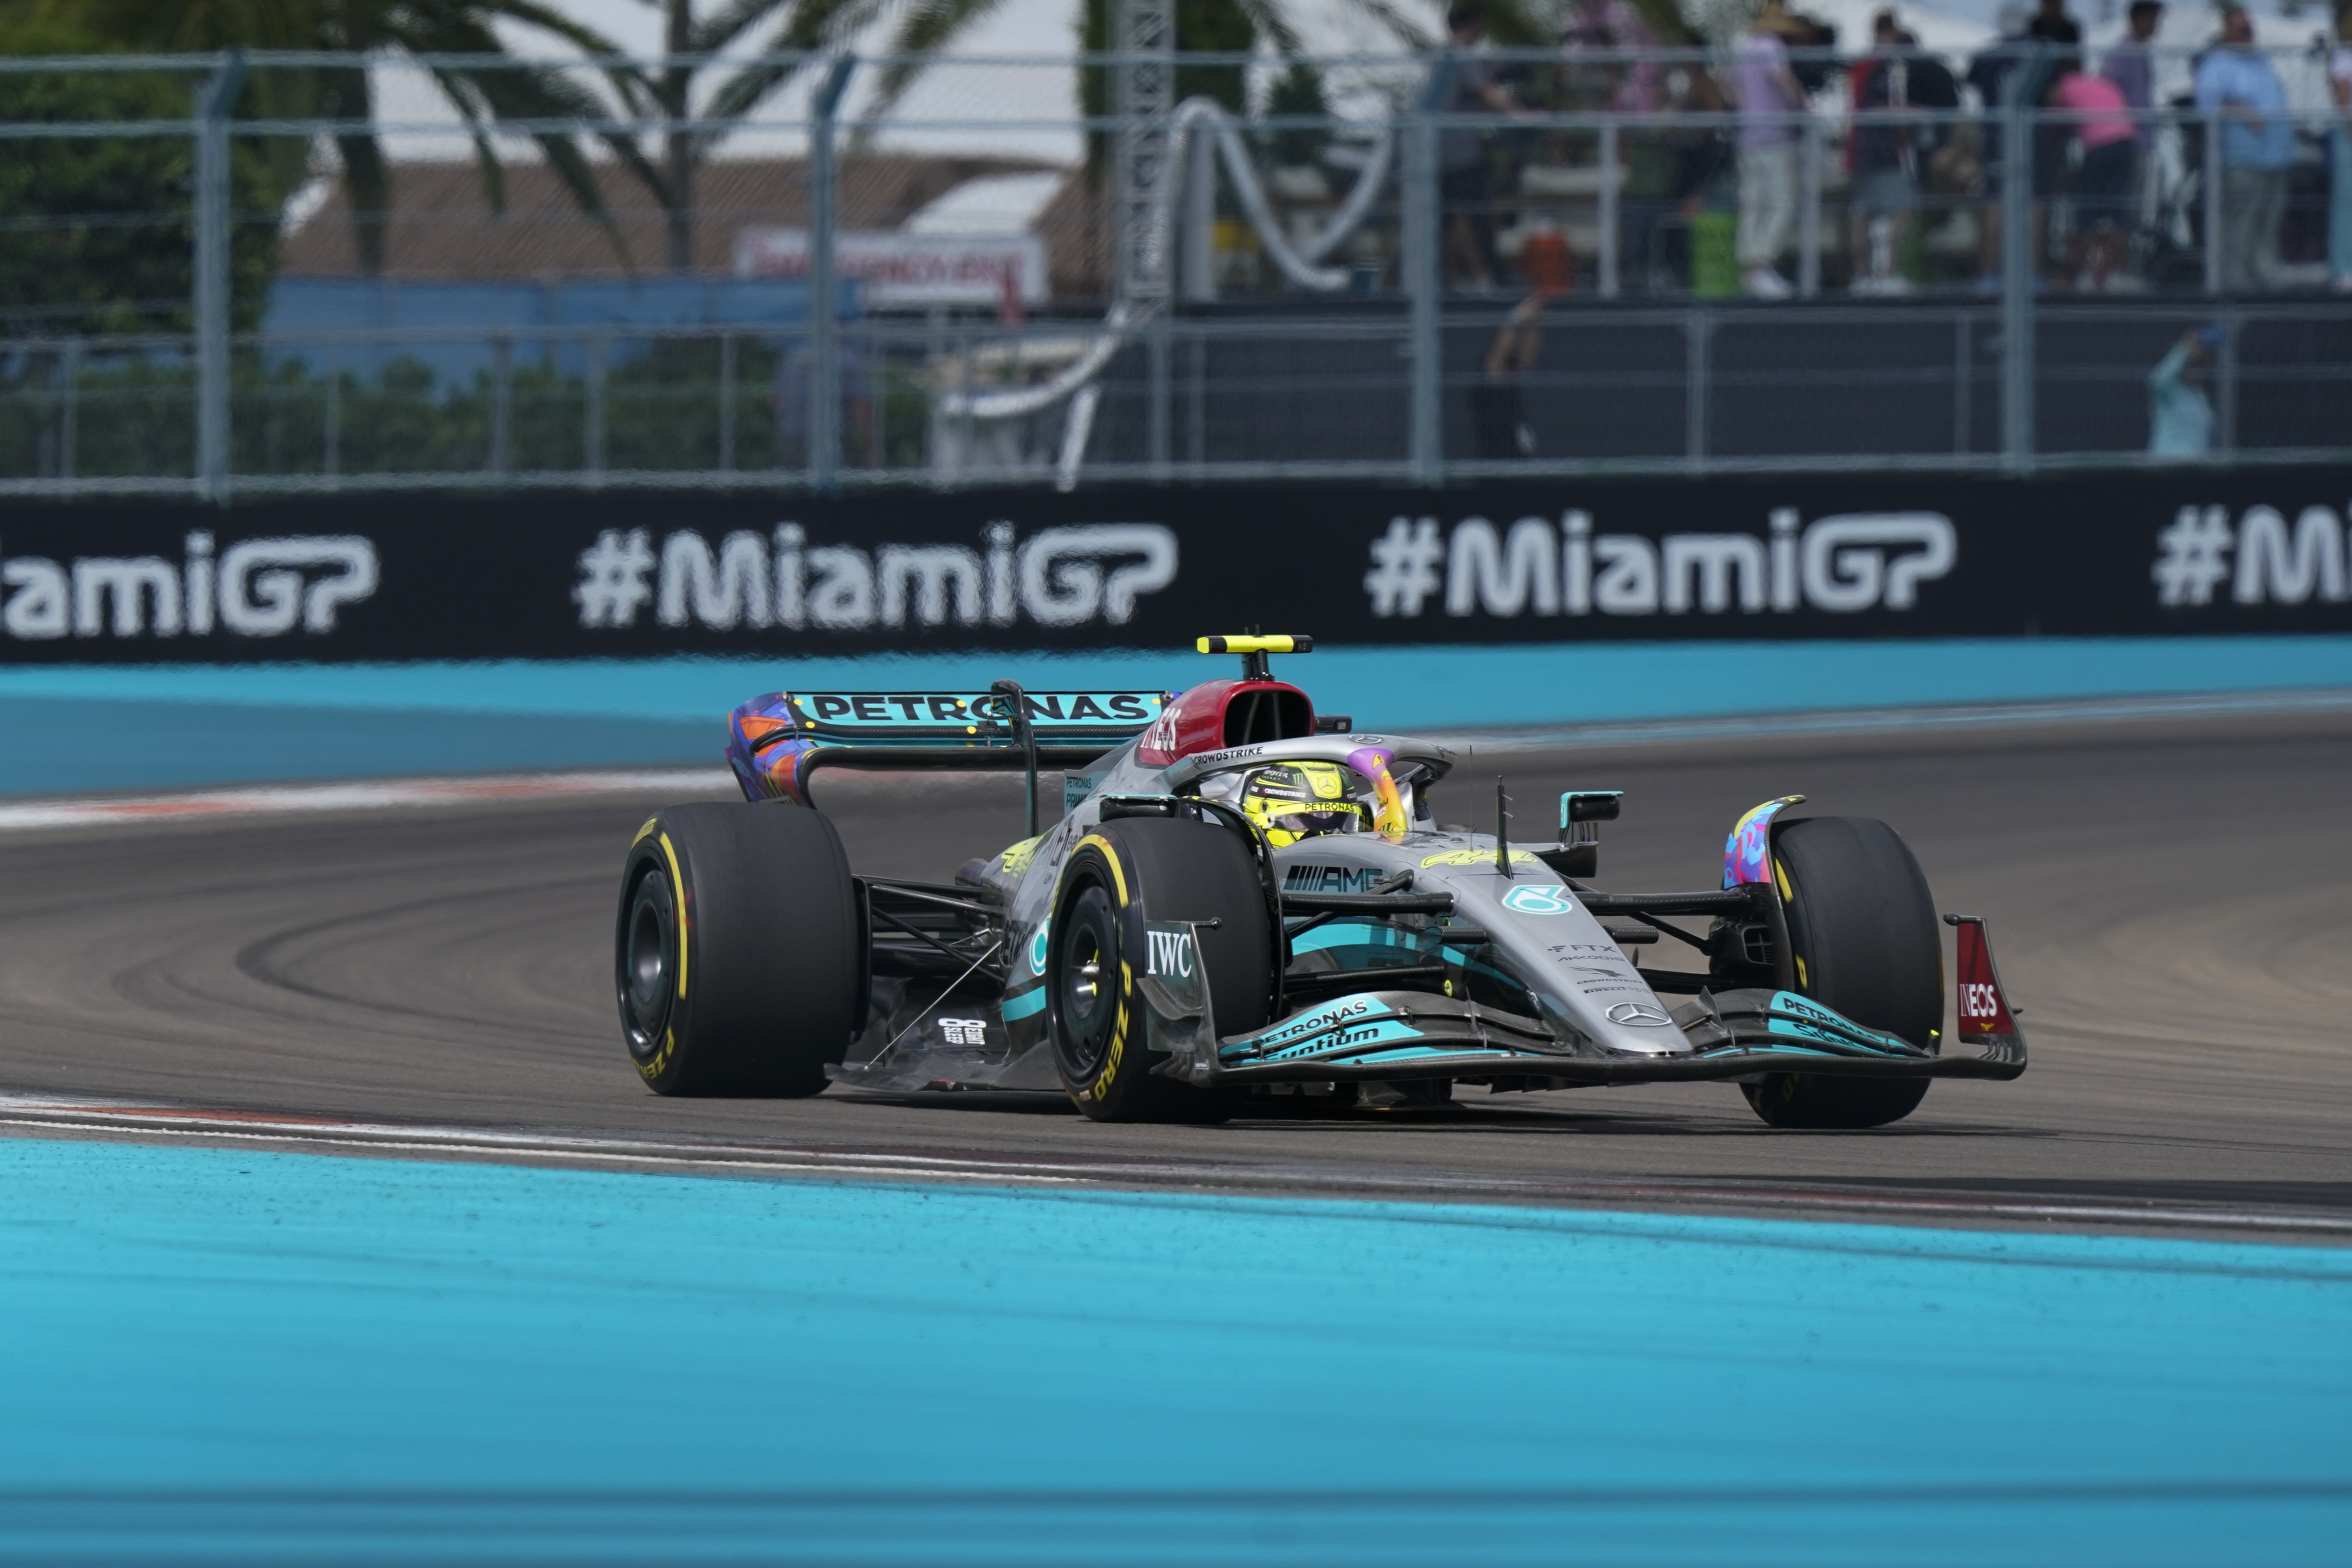 How to watch F1 Miami Grand Prix Time, TV channel, free live stream, betting odds